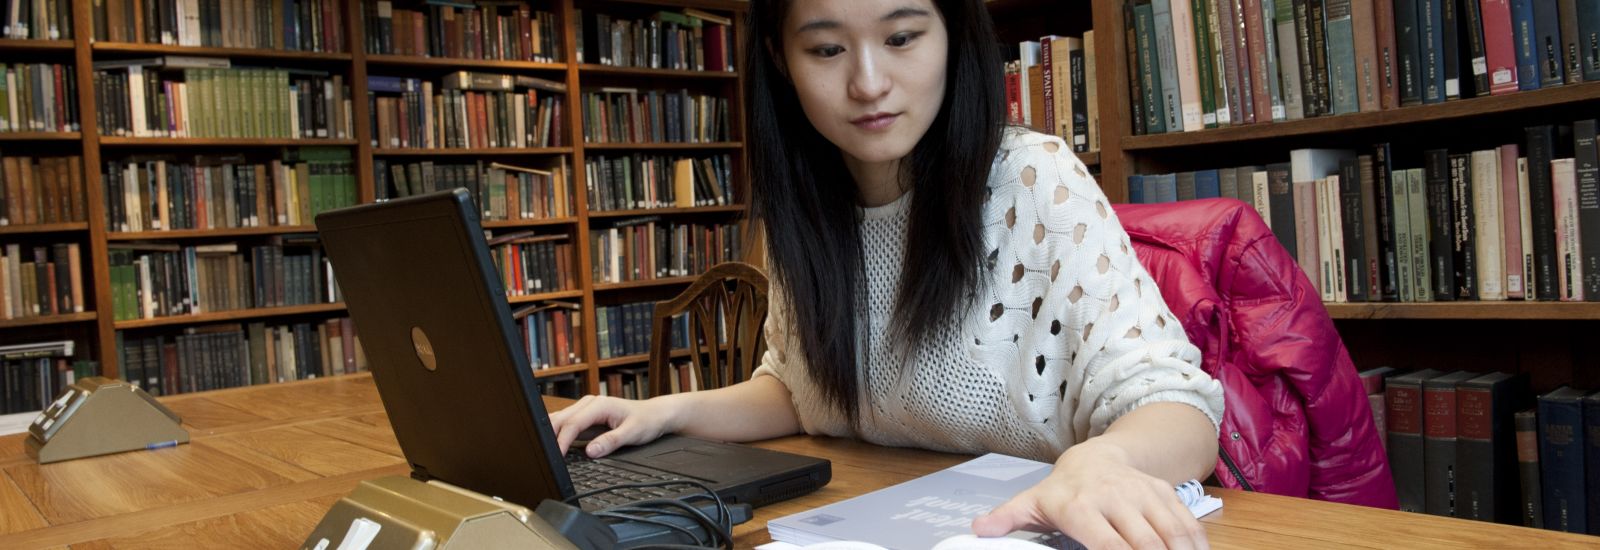 Student working in the library at Somerville College